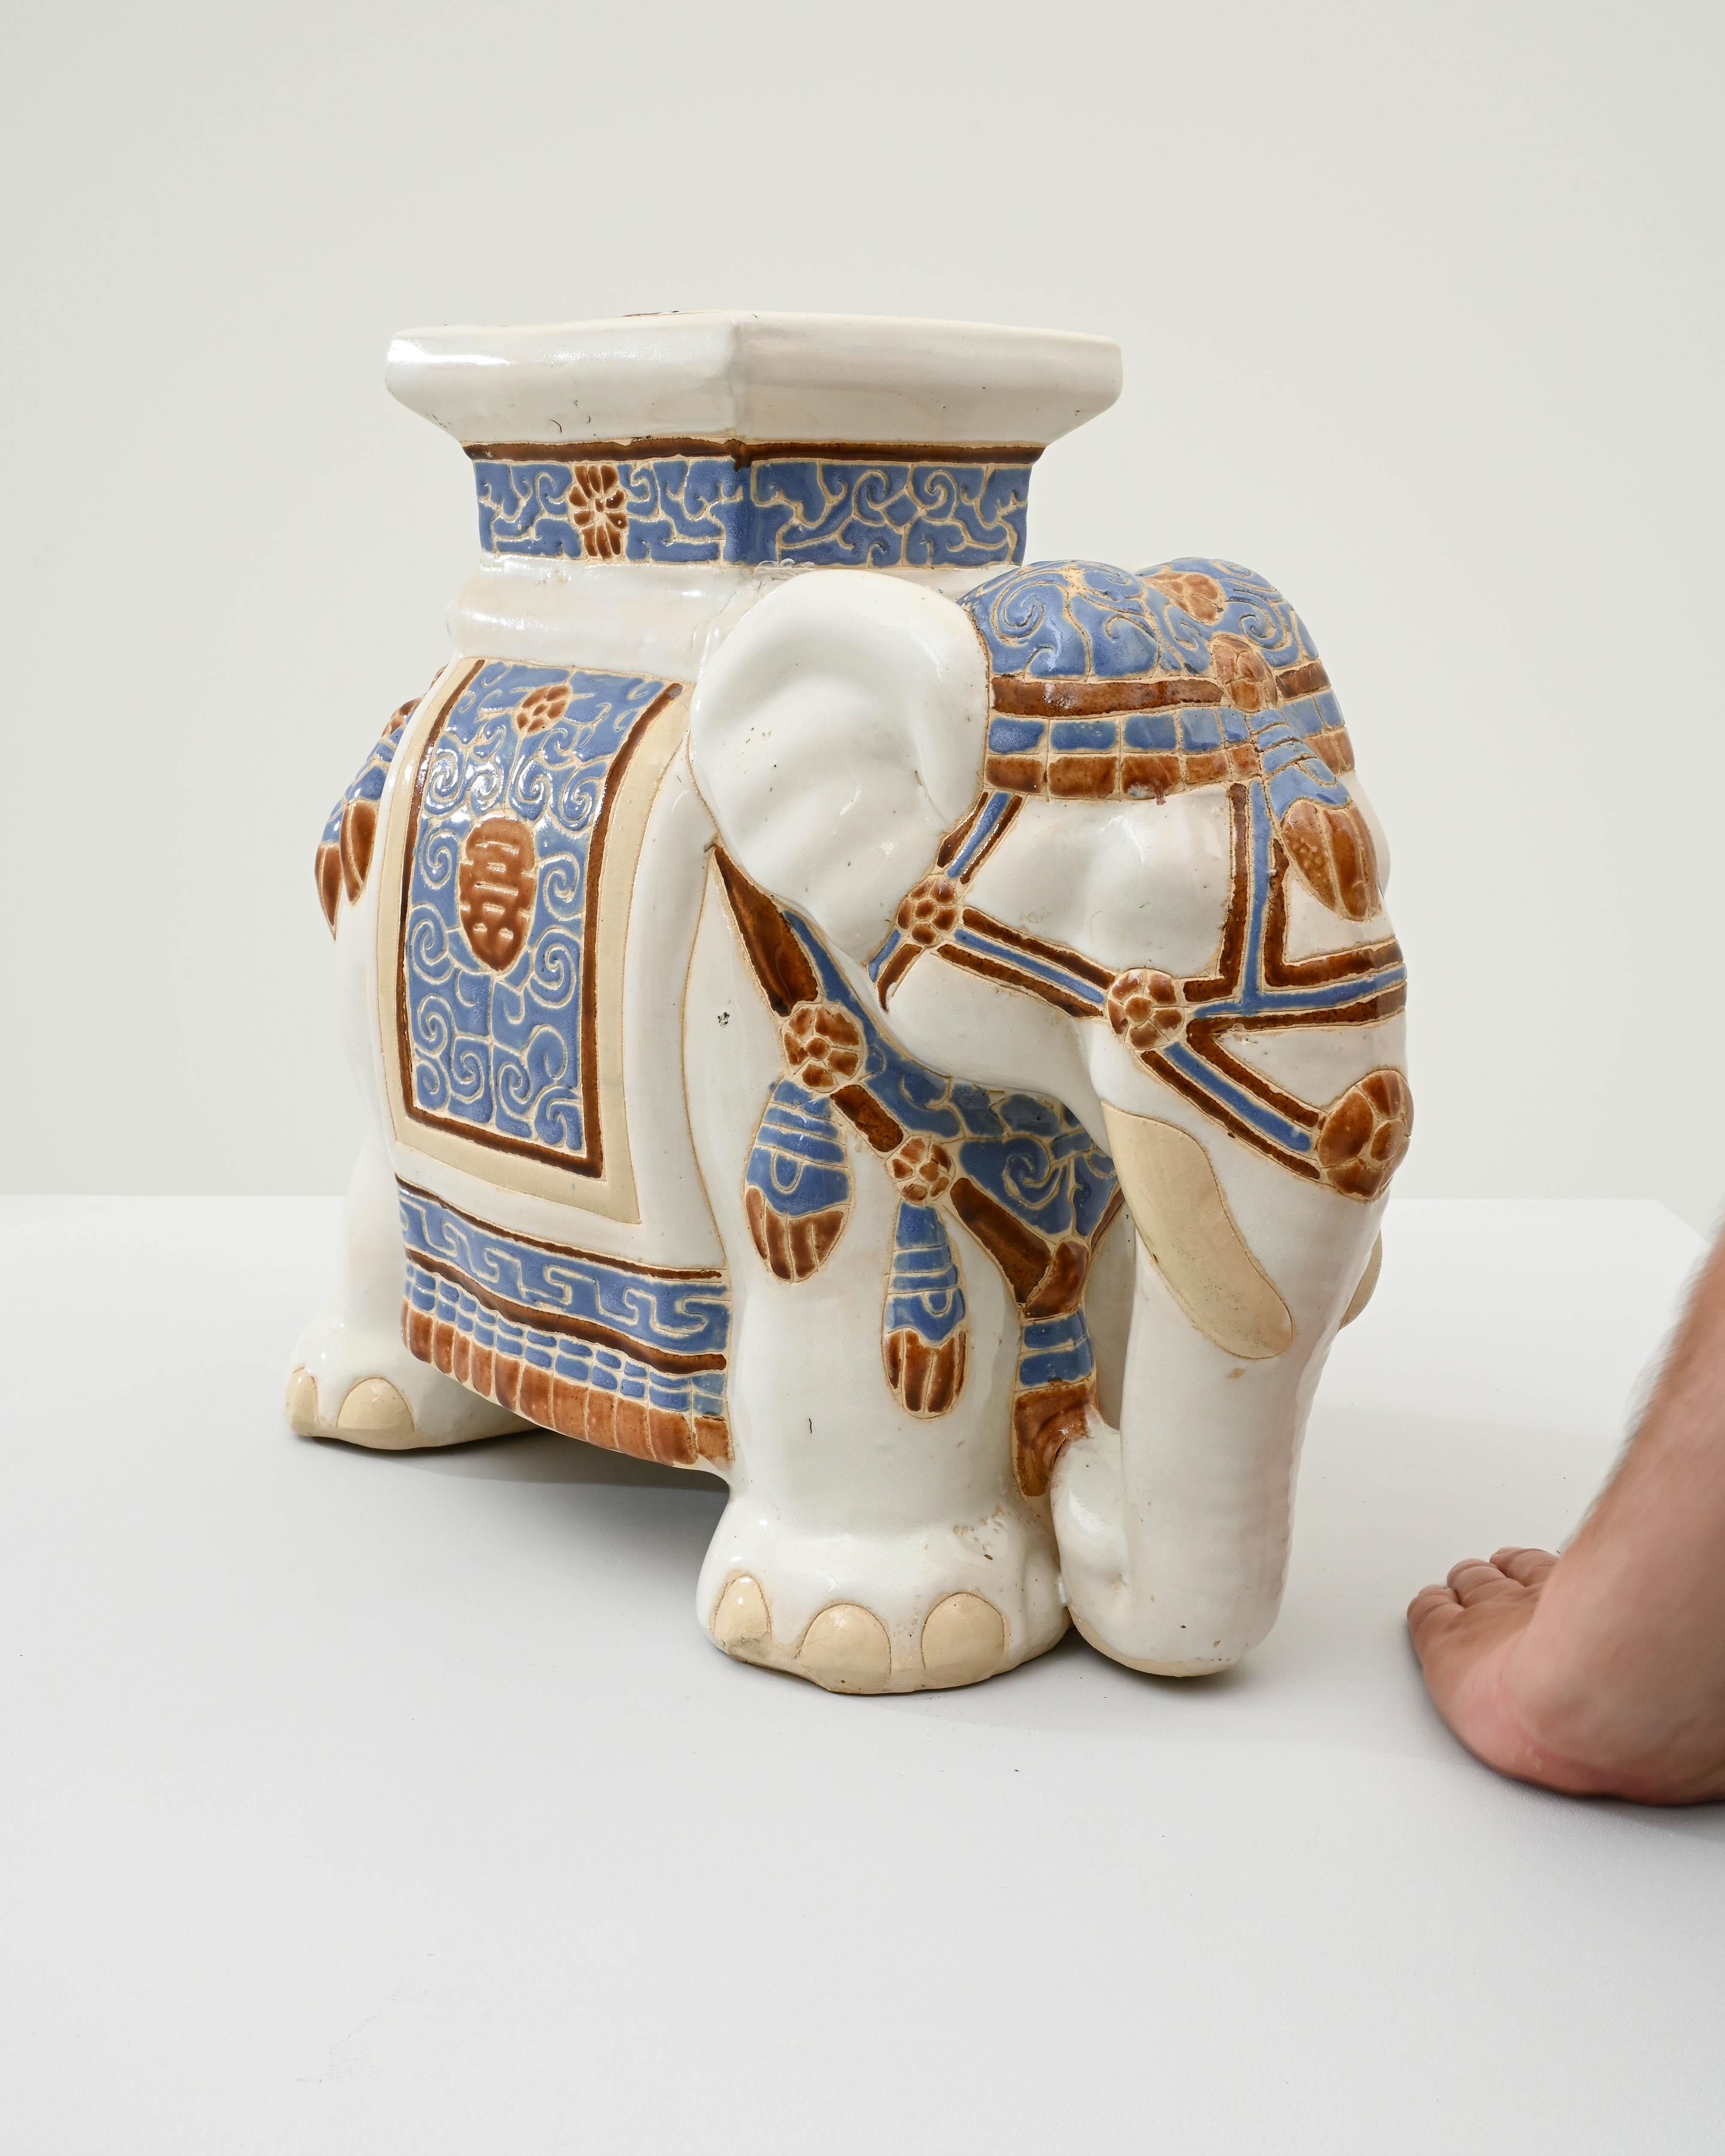 A ceramic decoration from 1960s France in the shape of an elephant. A saddle seat and blanket are glazed with pale blue and ochre, the elephant’s skin painted with glossy white and laced with lines of the earth tone clay body; the assortment of